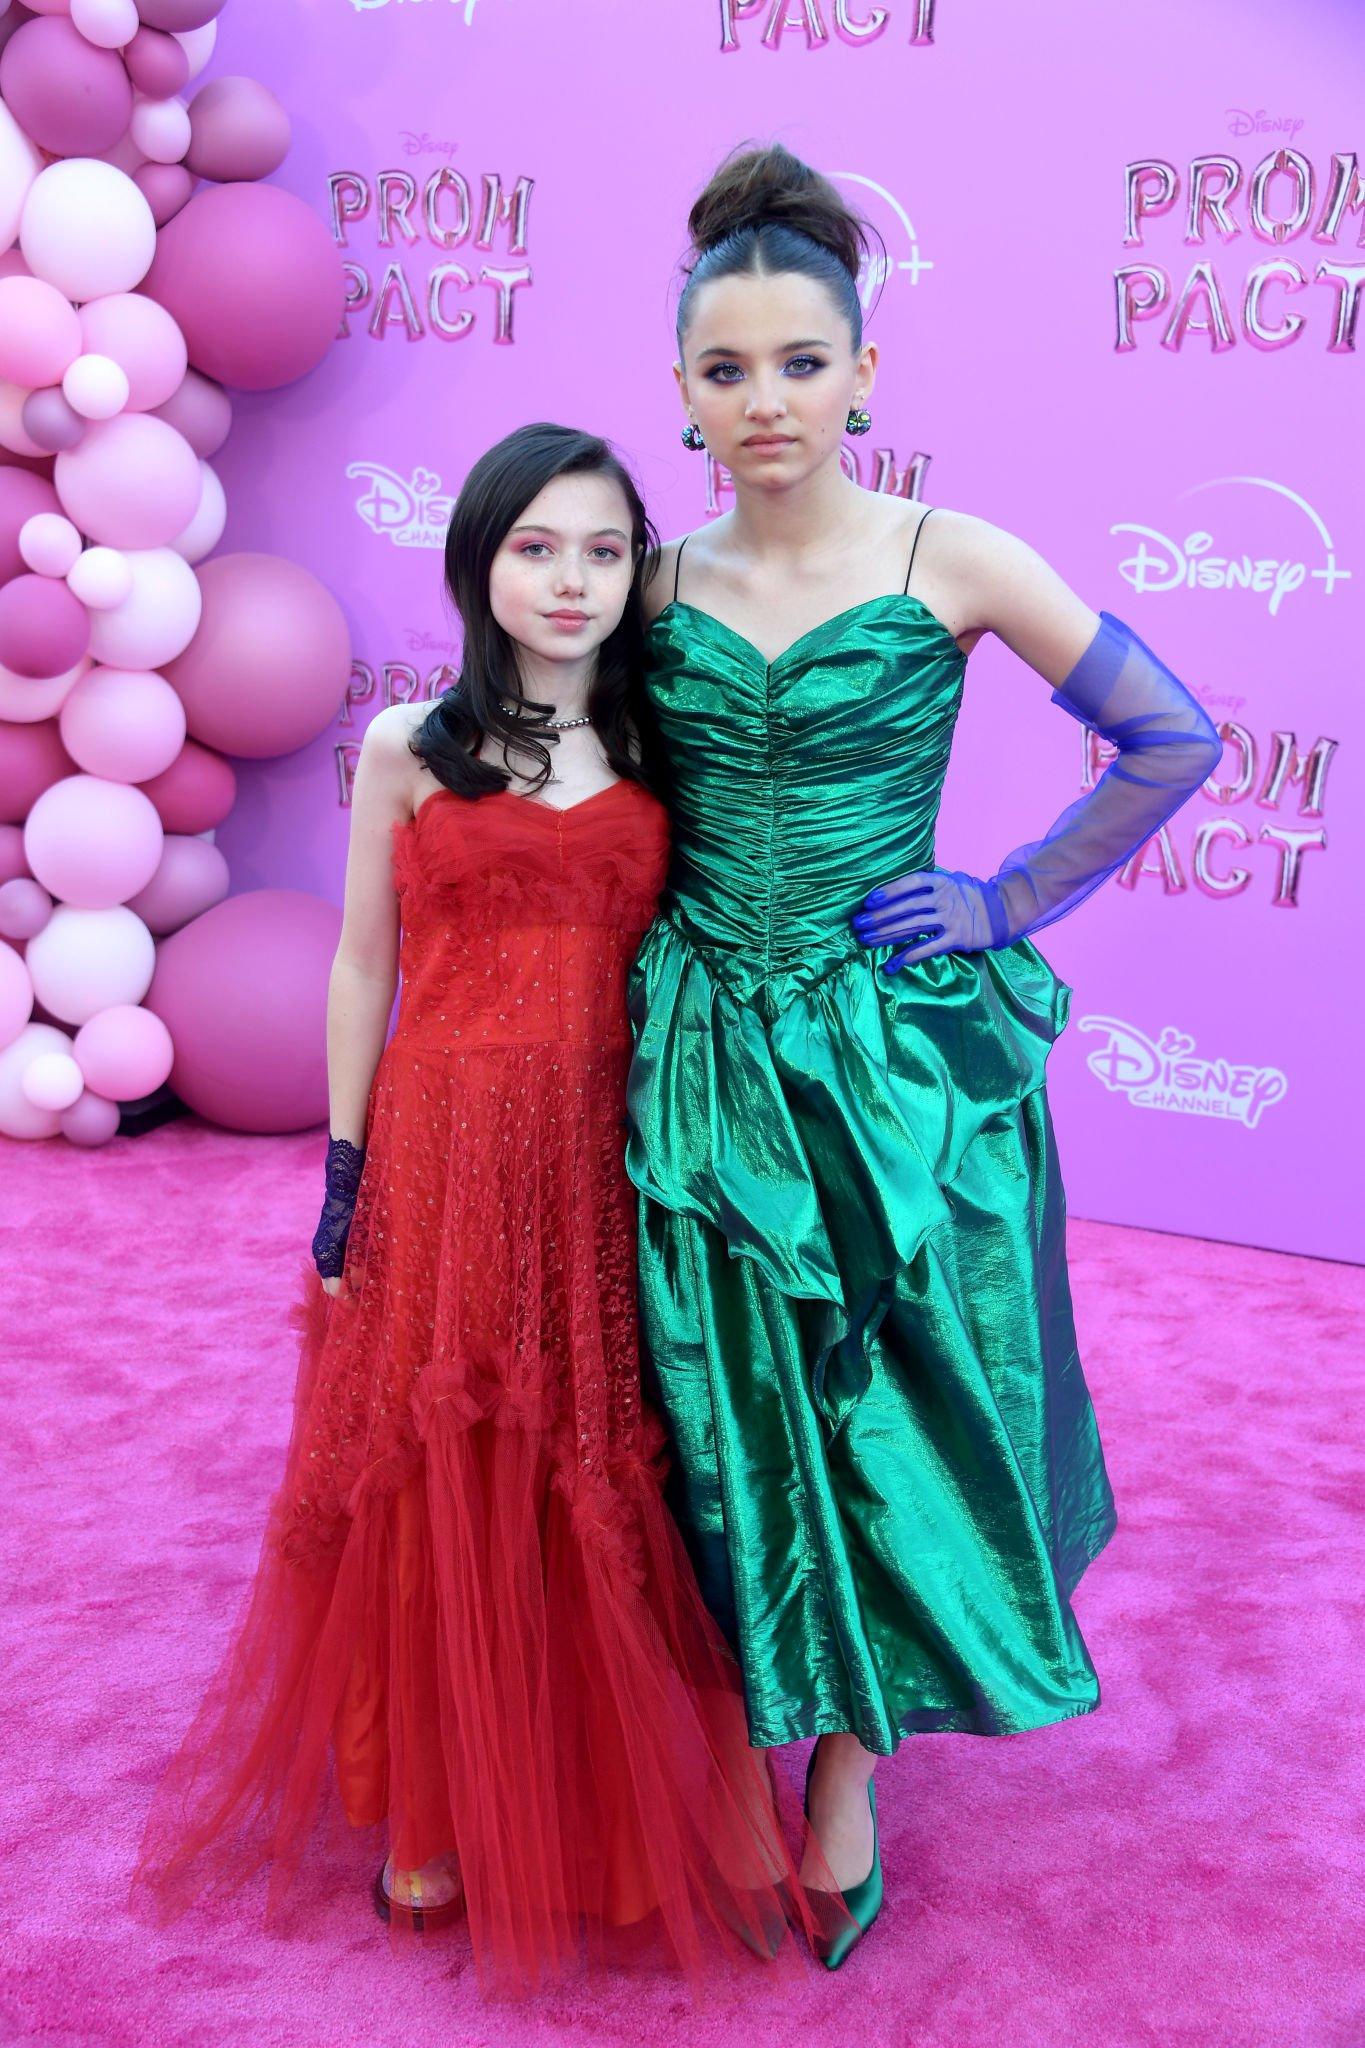 Violet and Madeleine McGraw attends the Red Carpet Premiere Event For Disney Original Movie "Prom Pact" at Wilshire Ebell Theatre on March 24, 2023 in Los Angeles, California.